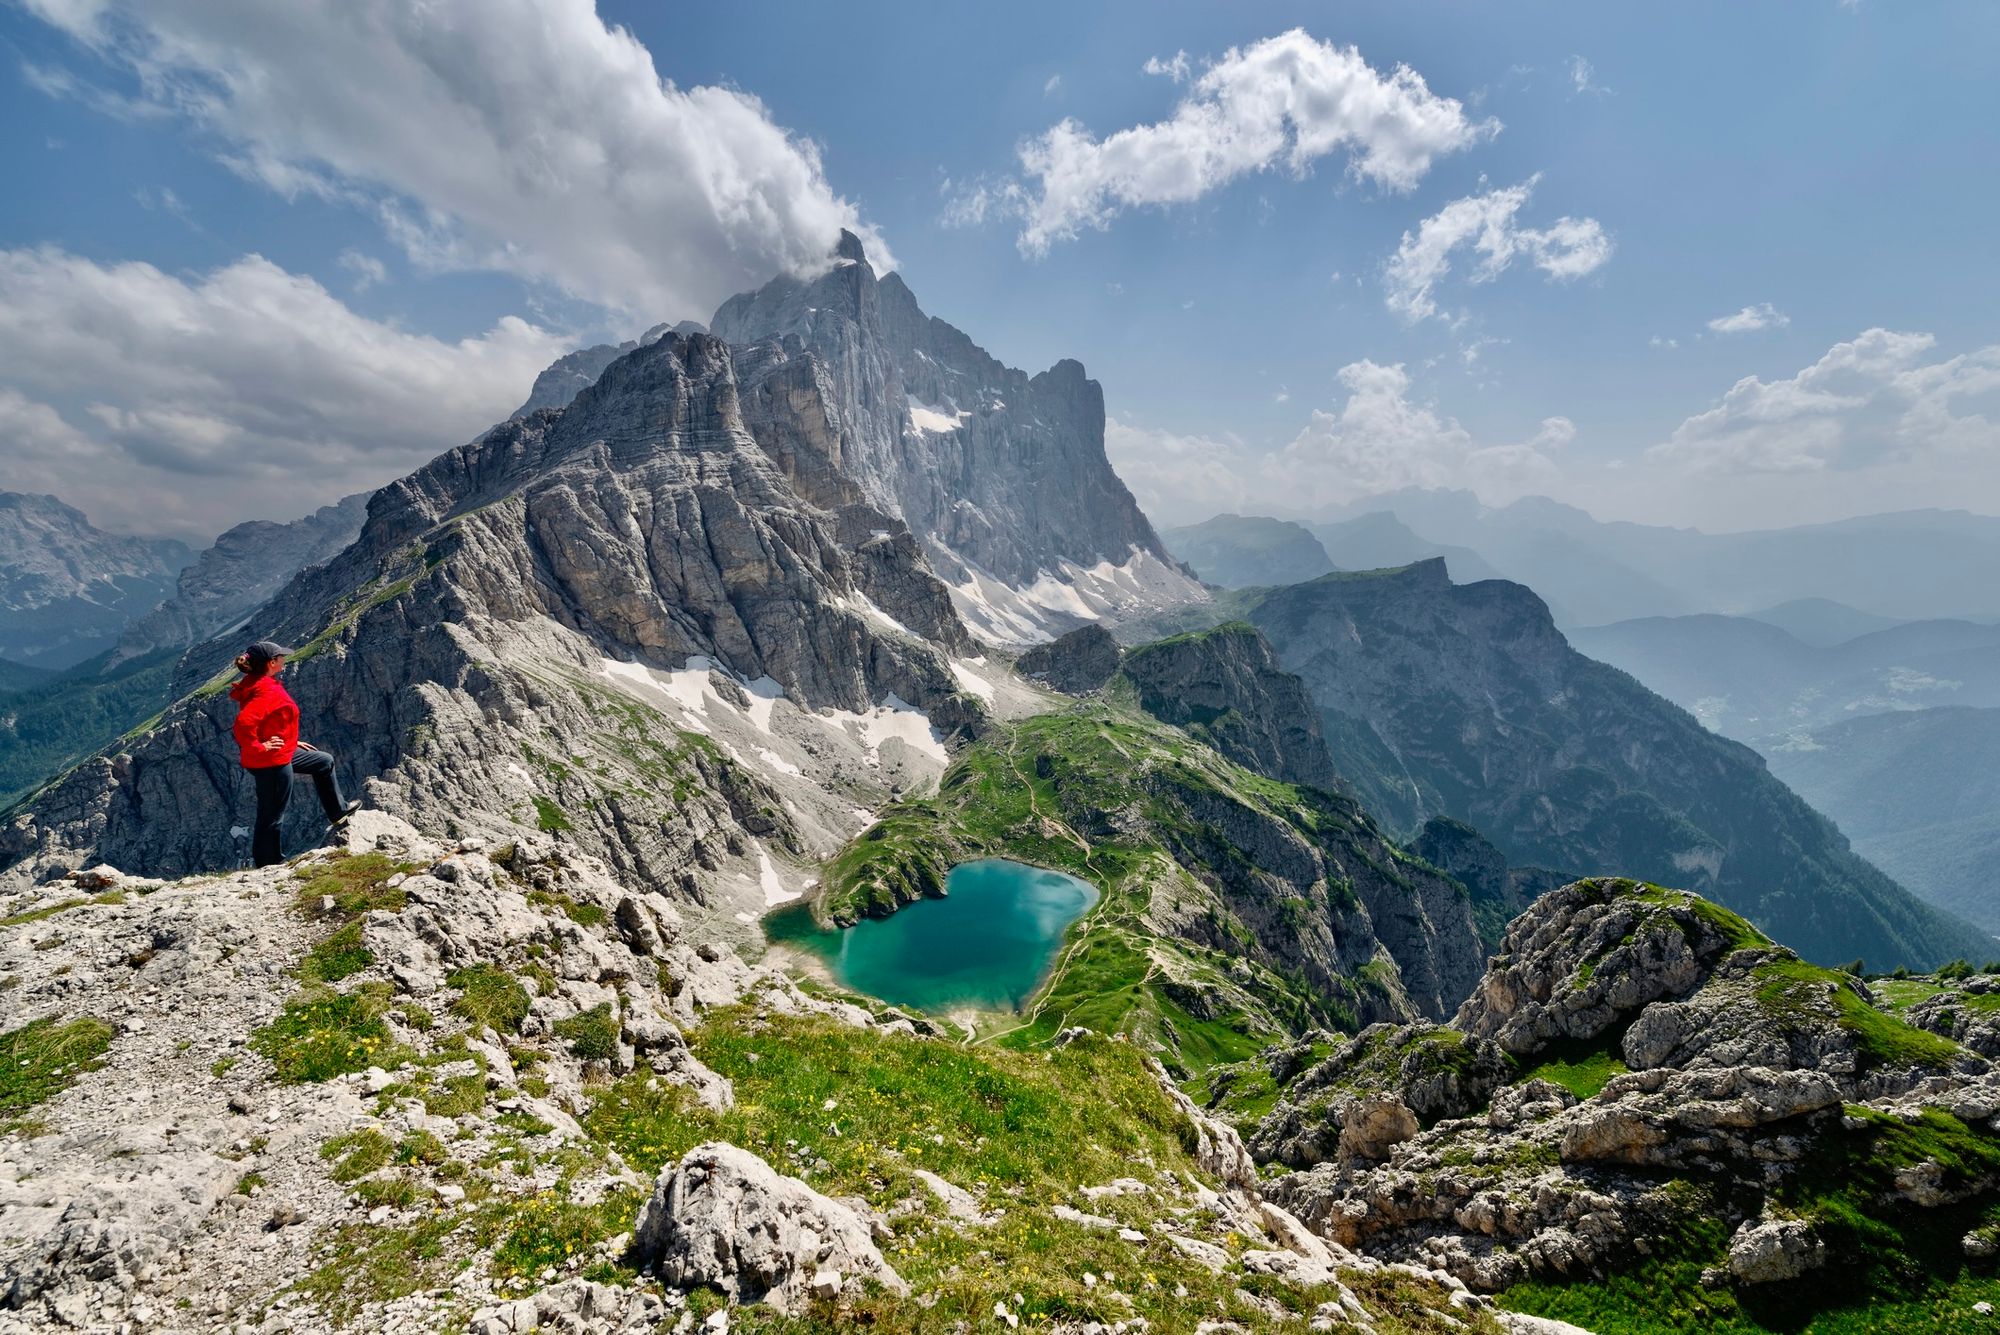 The view over Coldai Lake in the Dolomites. Photo: Getty.